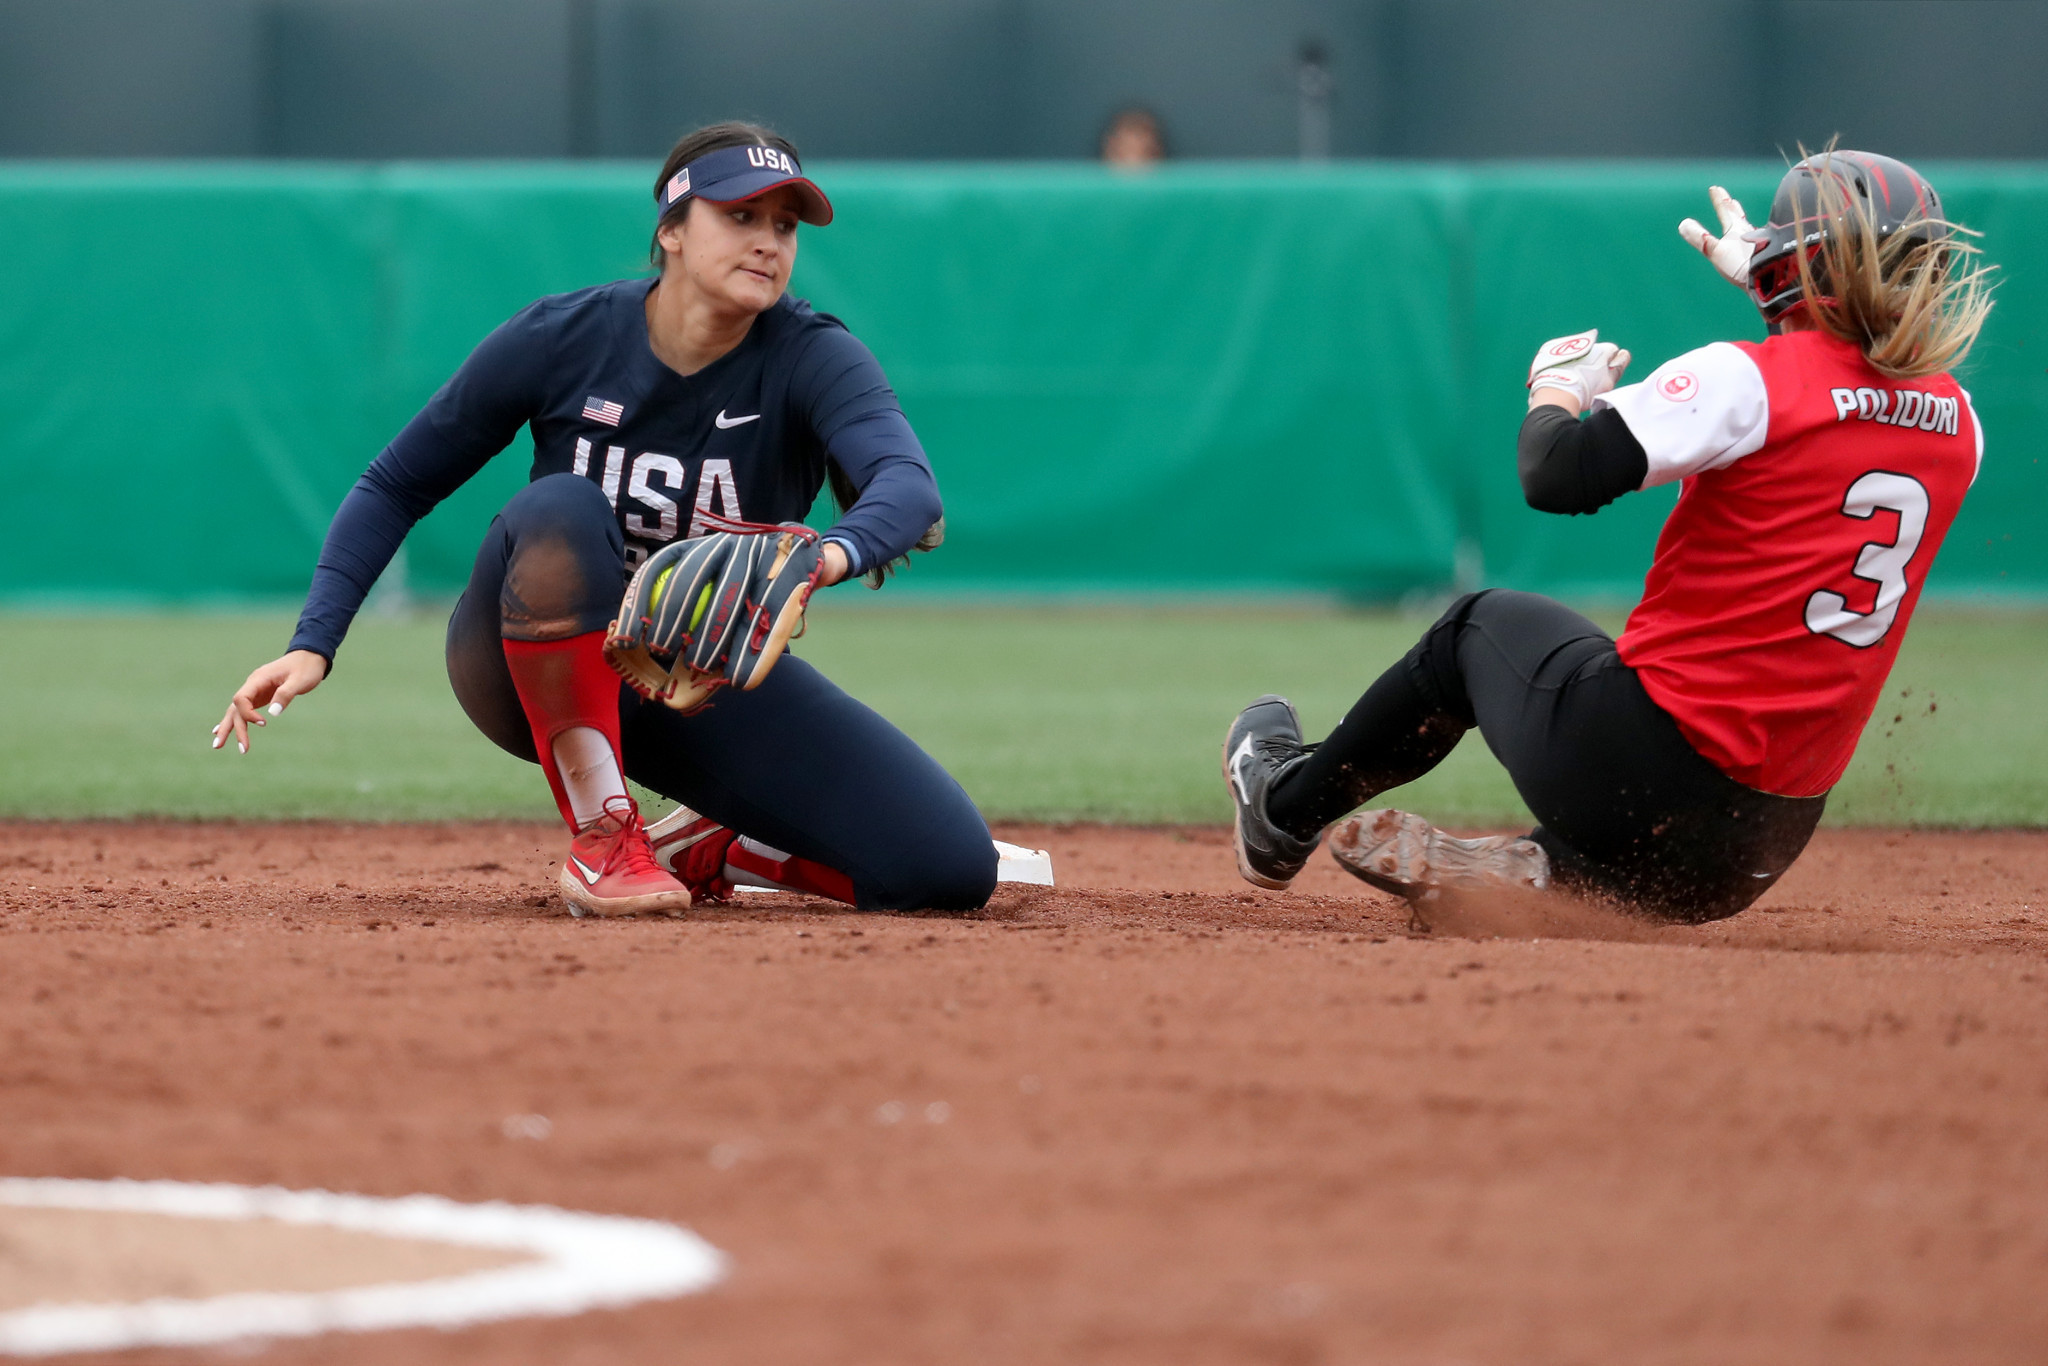 Softball is returning to the Olympics following its axing after Beijing 2008 ©Getty Images